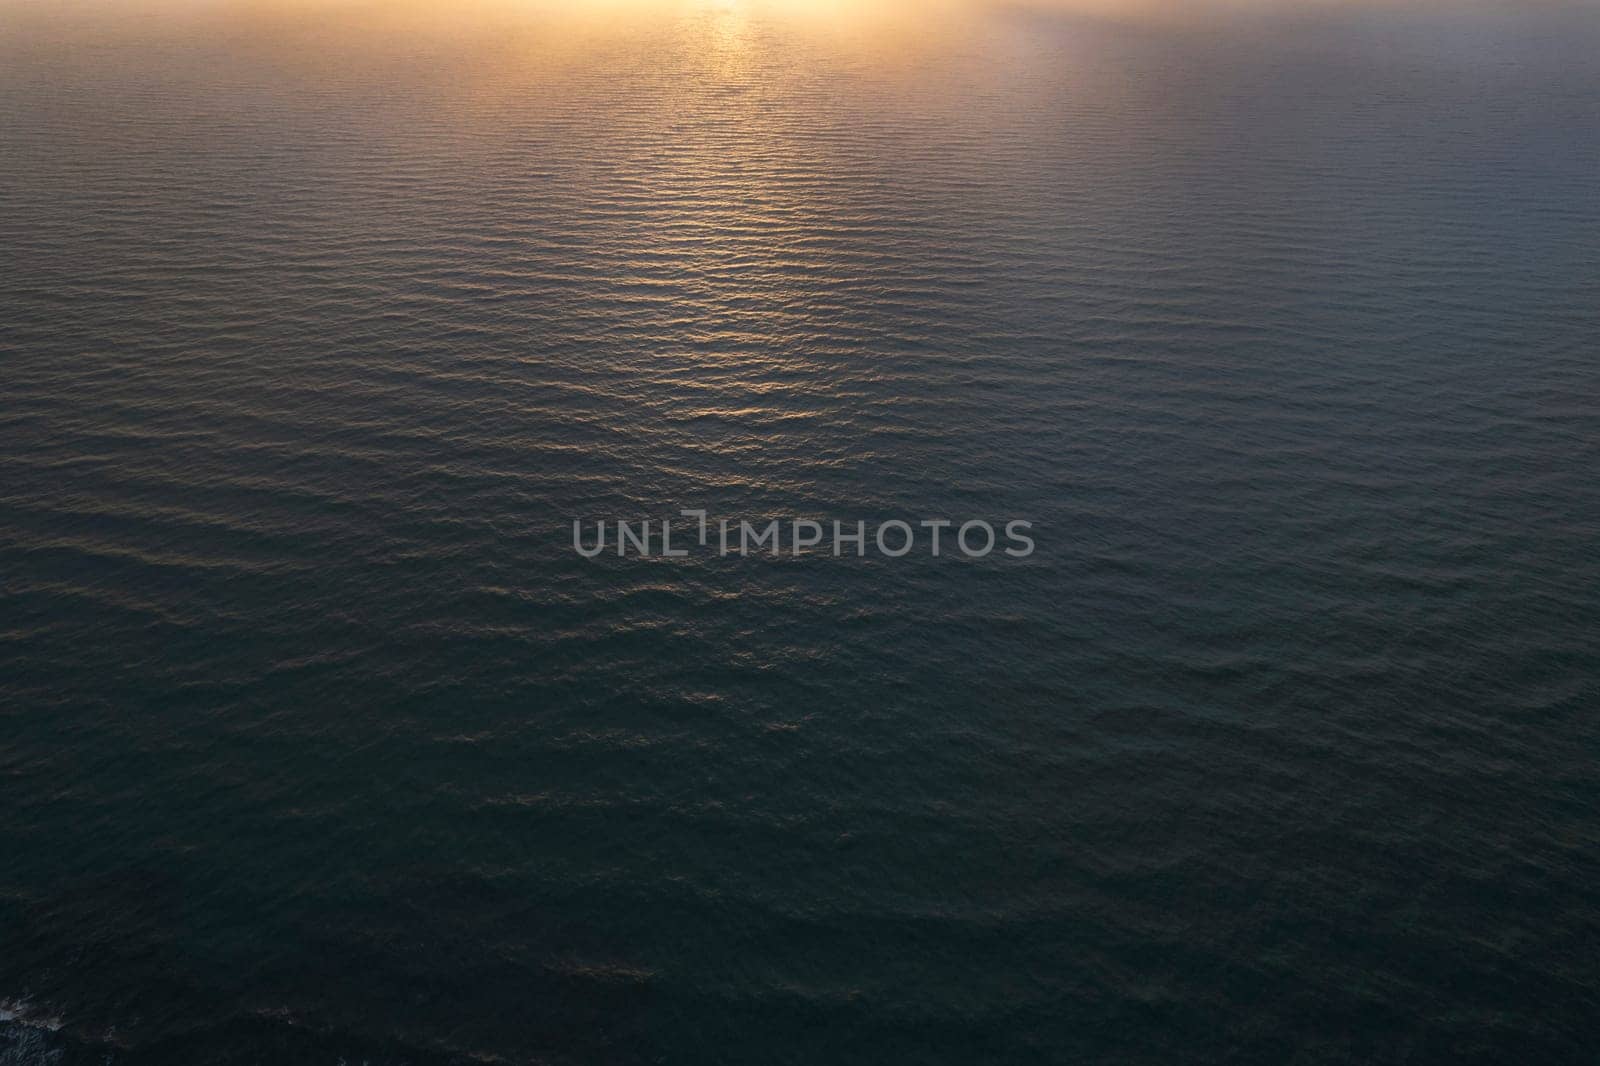 Aerial view of a sunset over the Mediterranean sea by fotografiche.eu